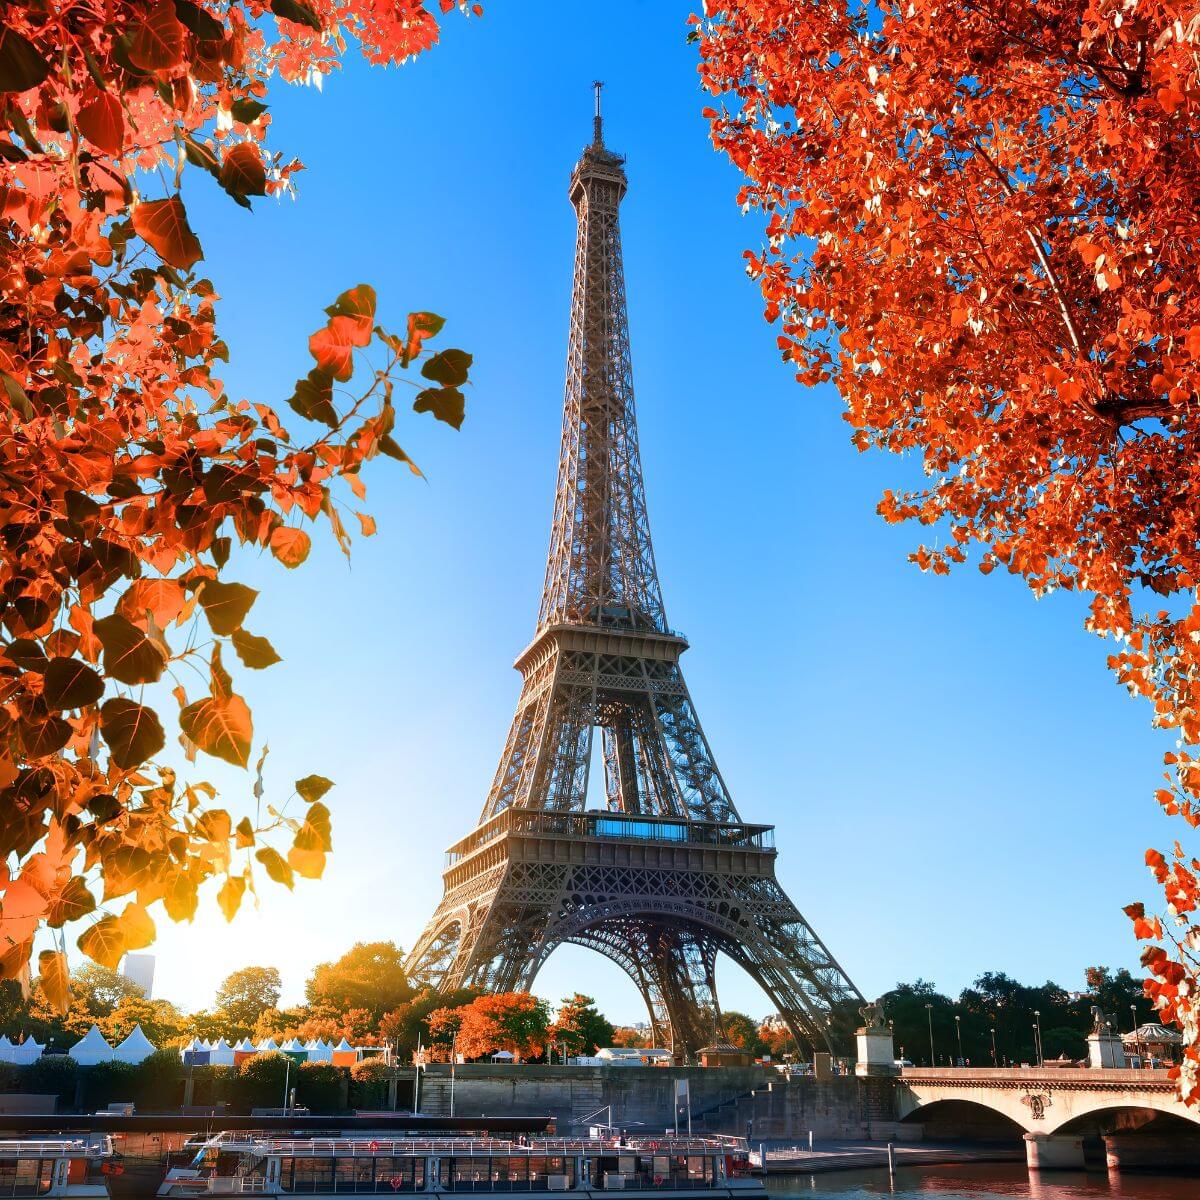 35 Top Attractions in Paris: Must-See Sights and Landmarks